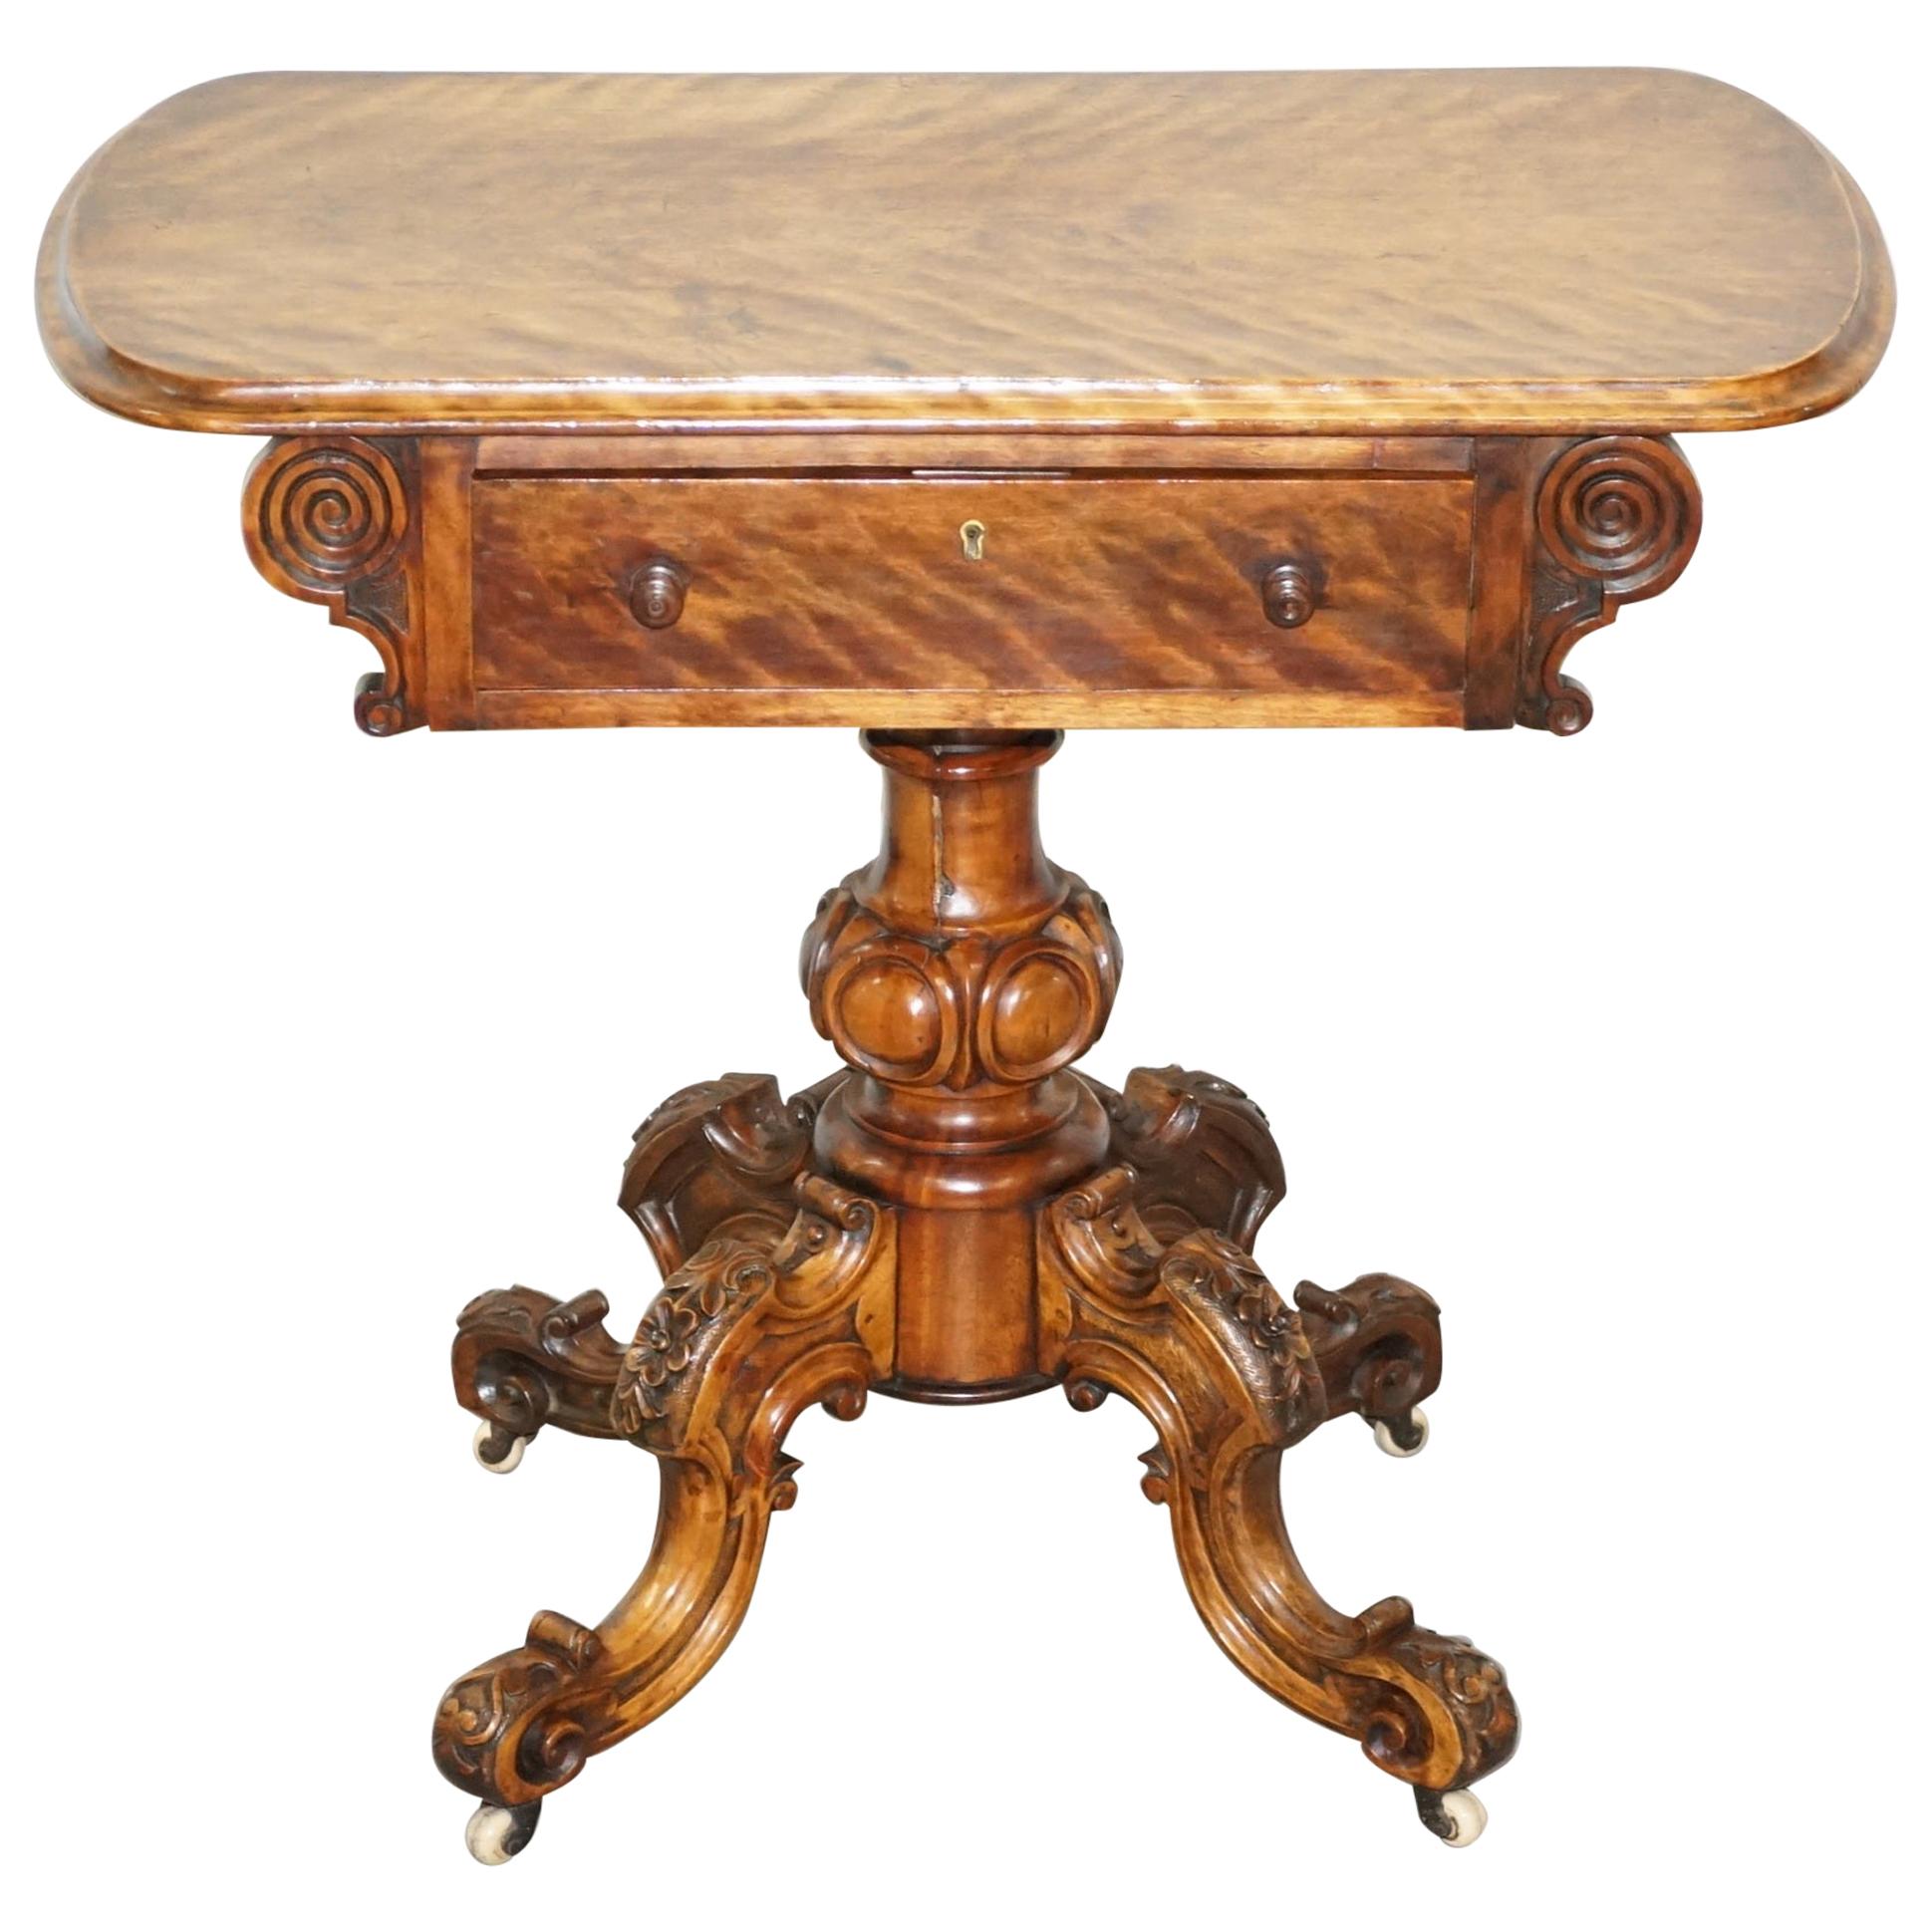 Sublime Early Victorian Walnut Side Occasional Table Ornately Carved Base & Legs